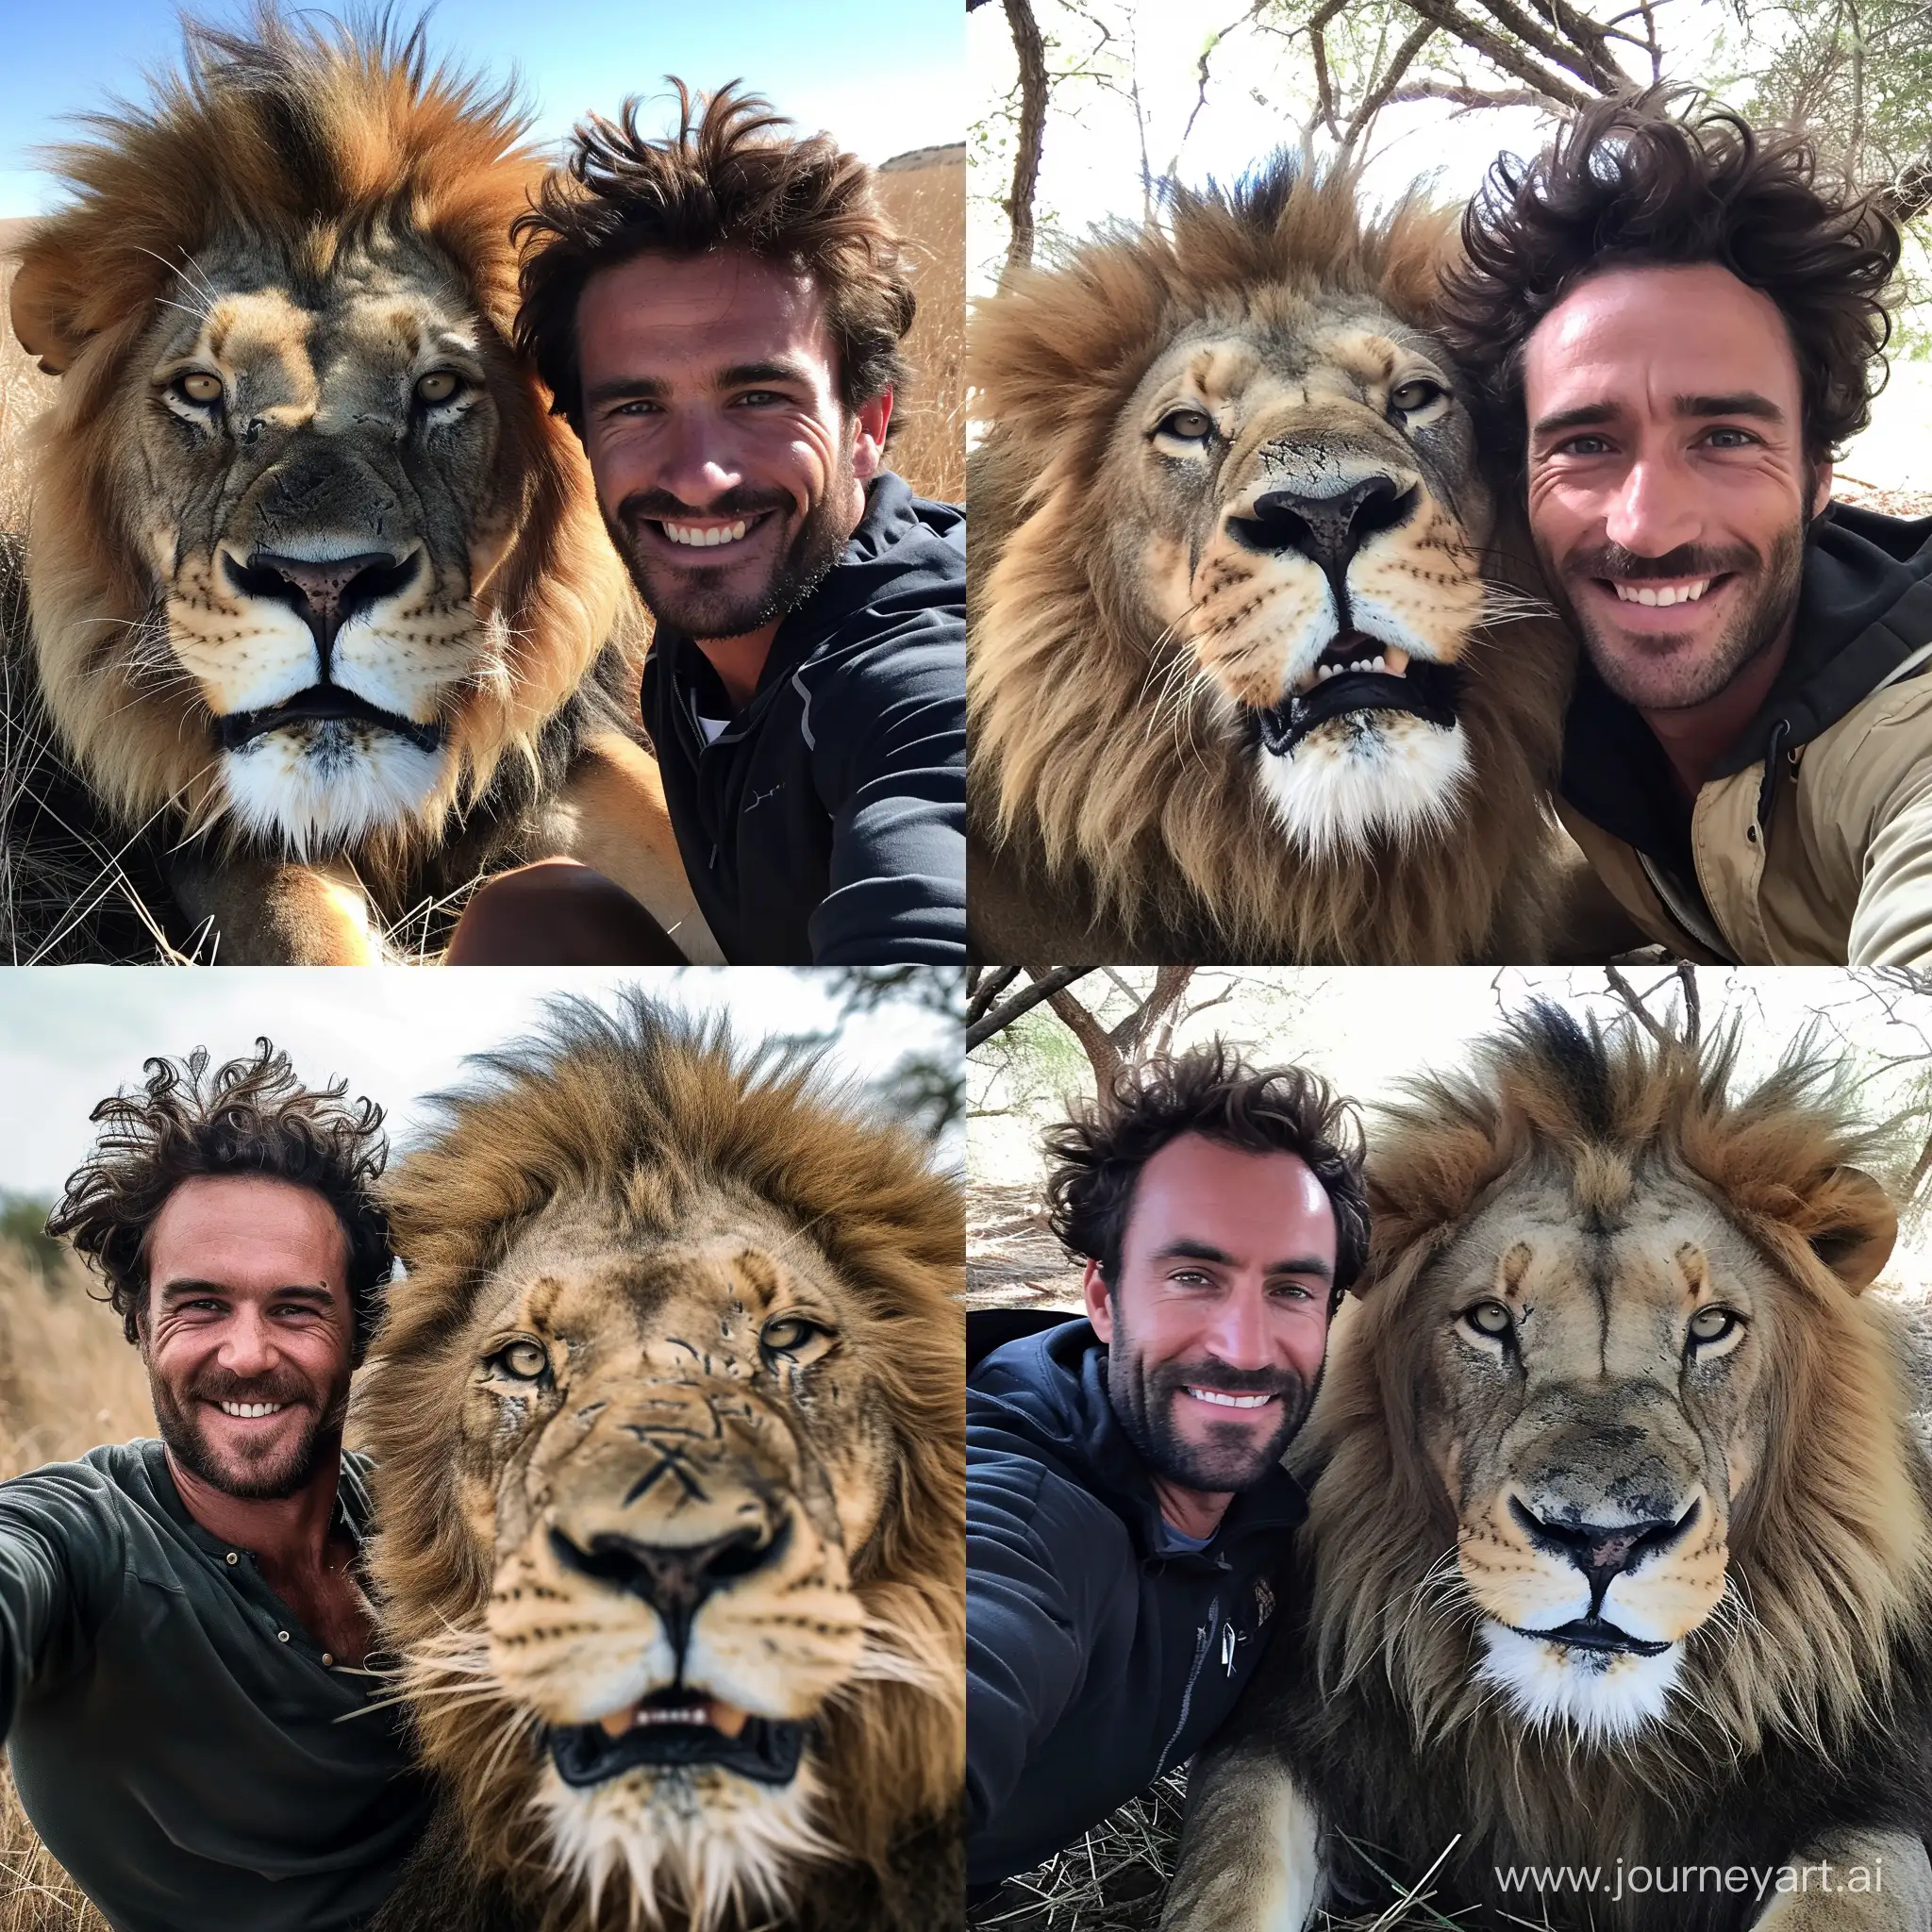 Daring-Selfie-Fearless-Man-Captures-Extreme-Moment-with-Ferocious-Lion